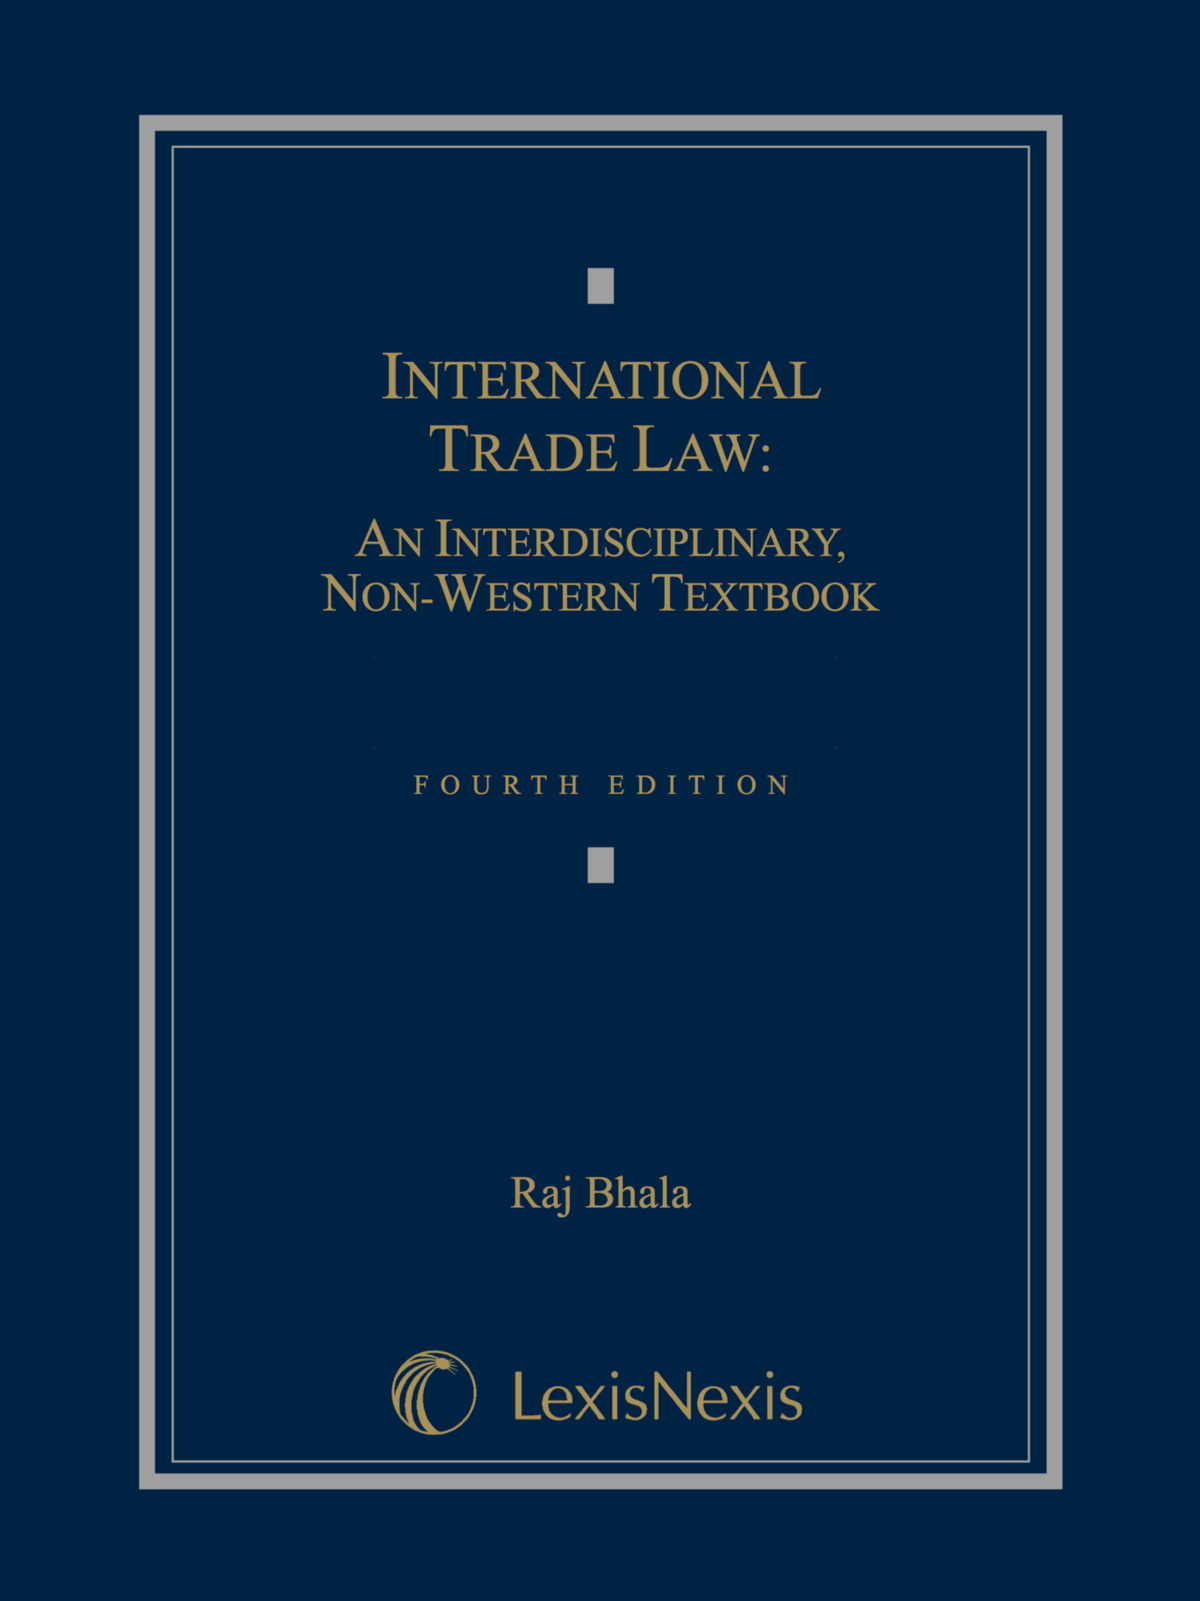 international trade law thesis